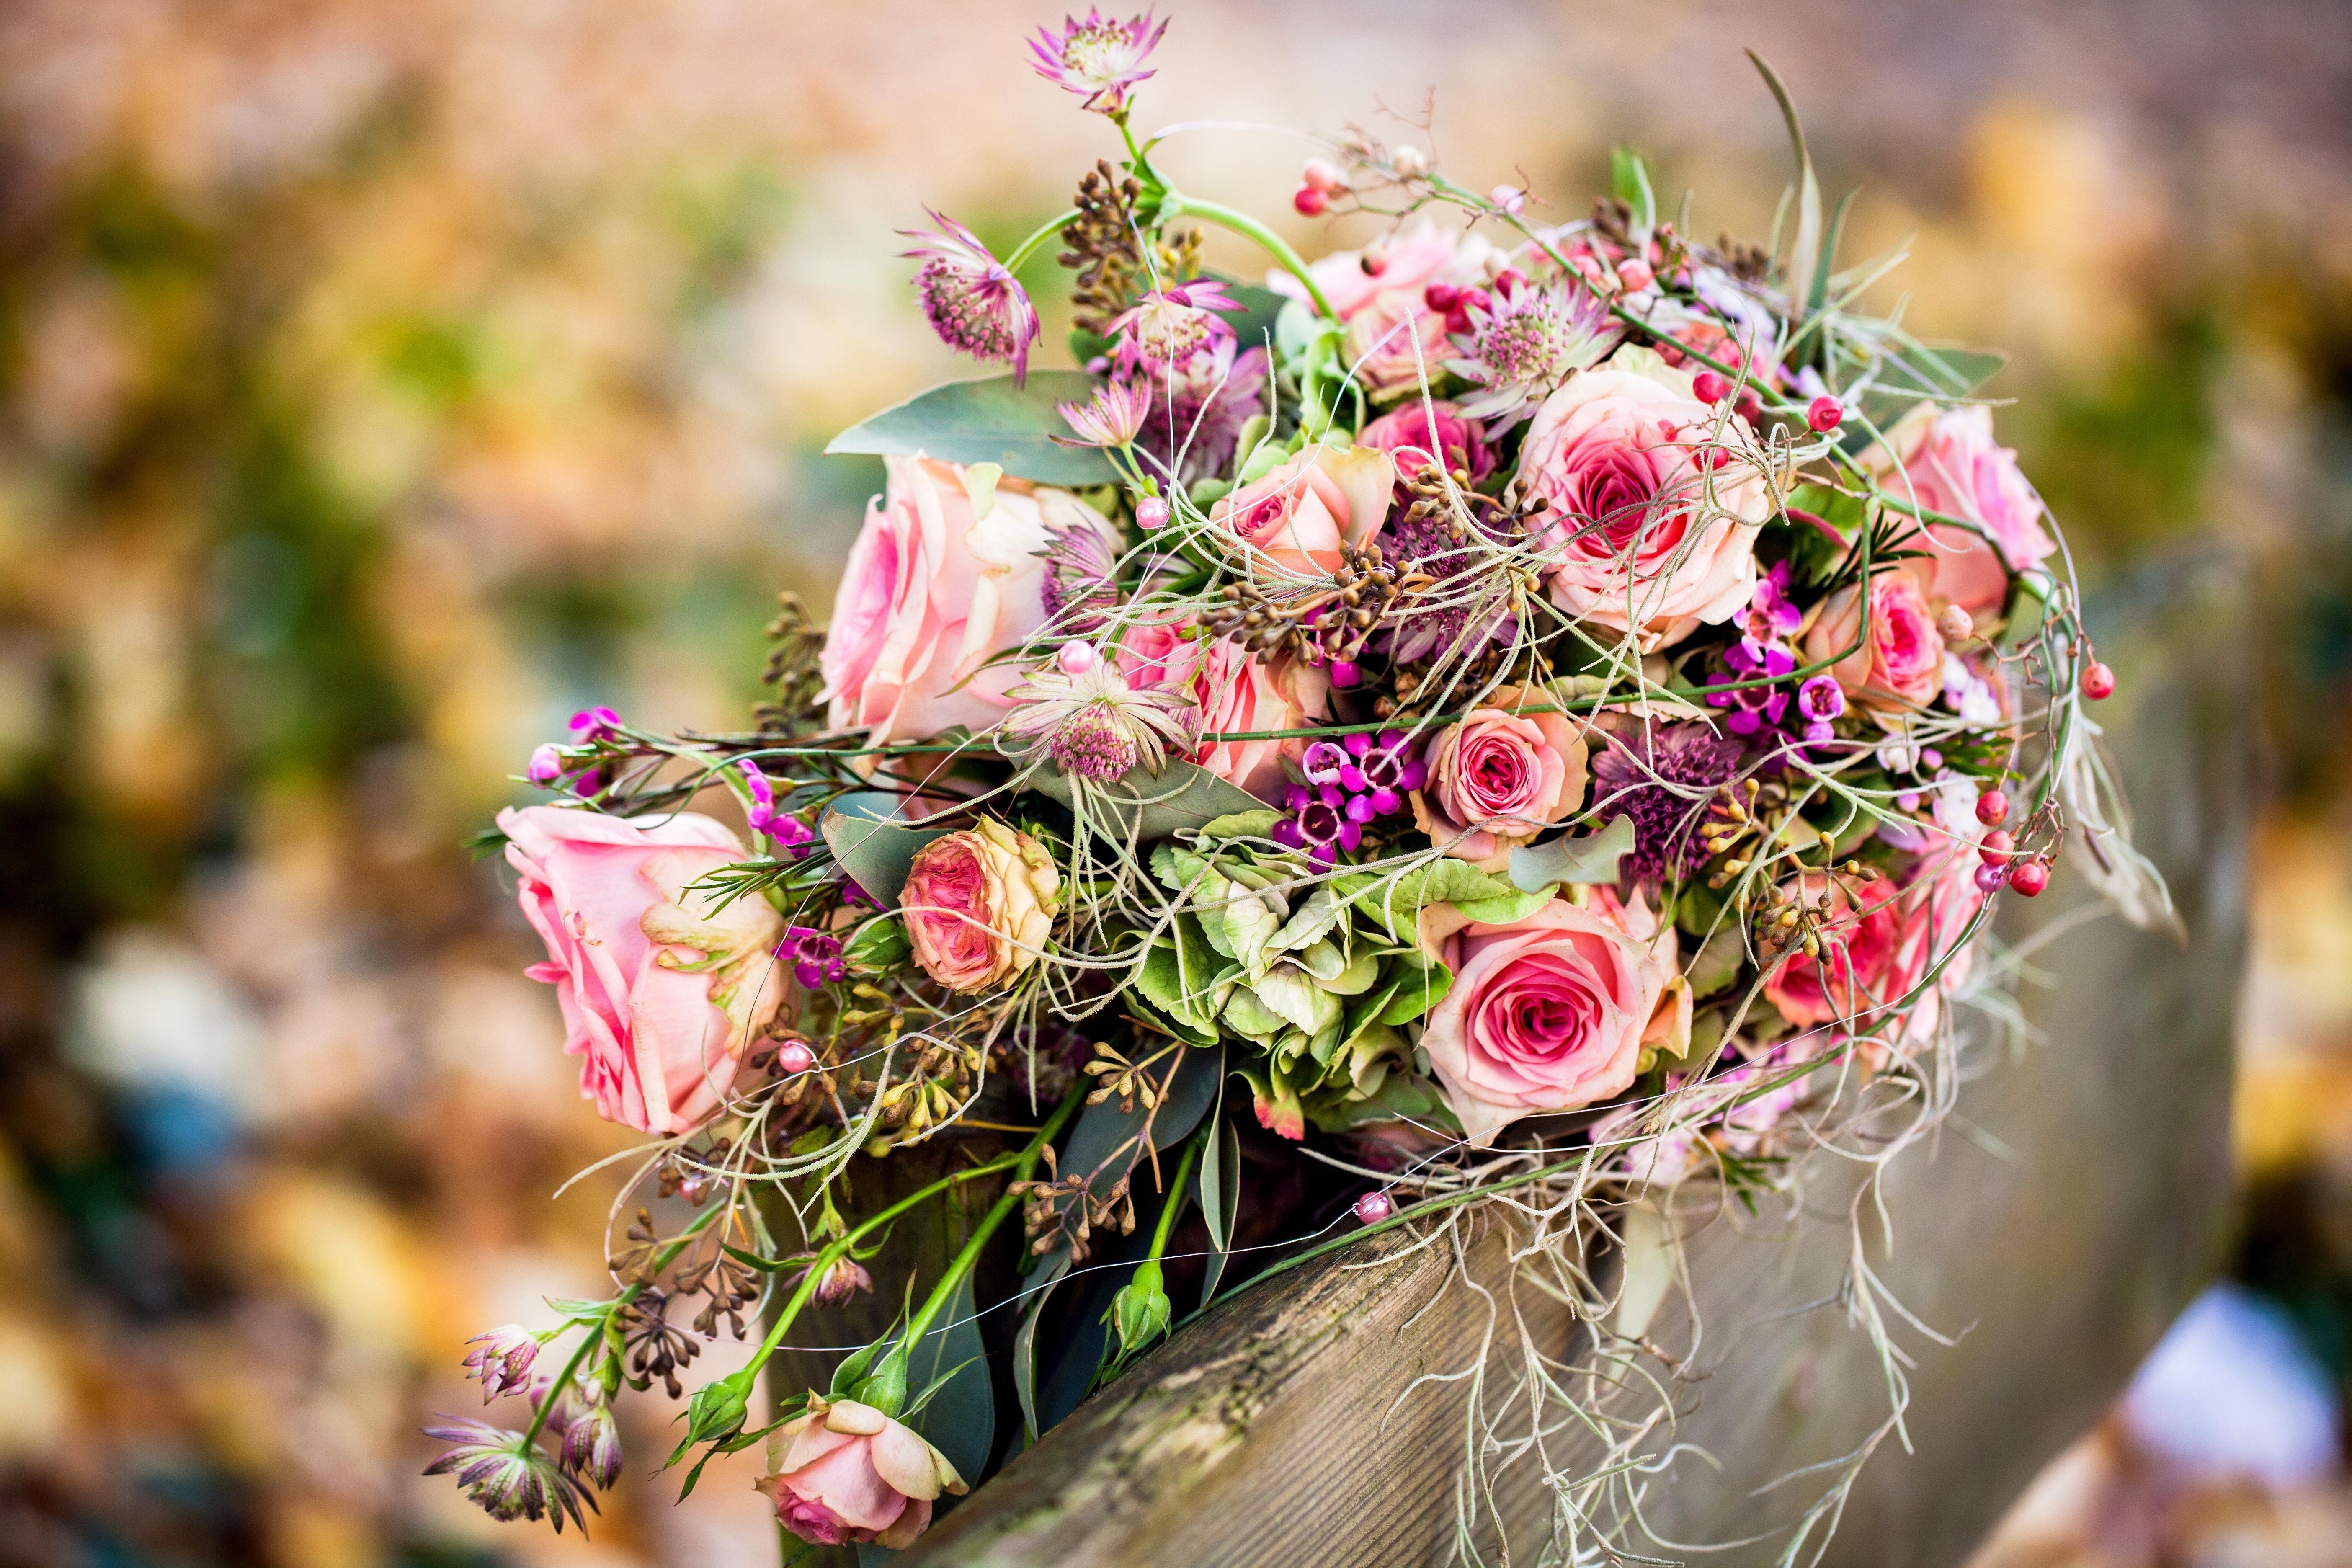 Autumn Bouquet With Roses wallpaper 2018 in Flowers